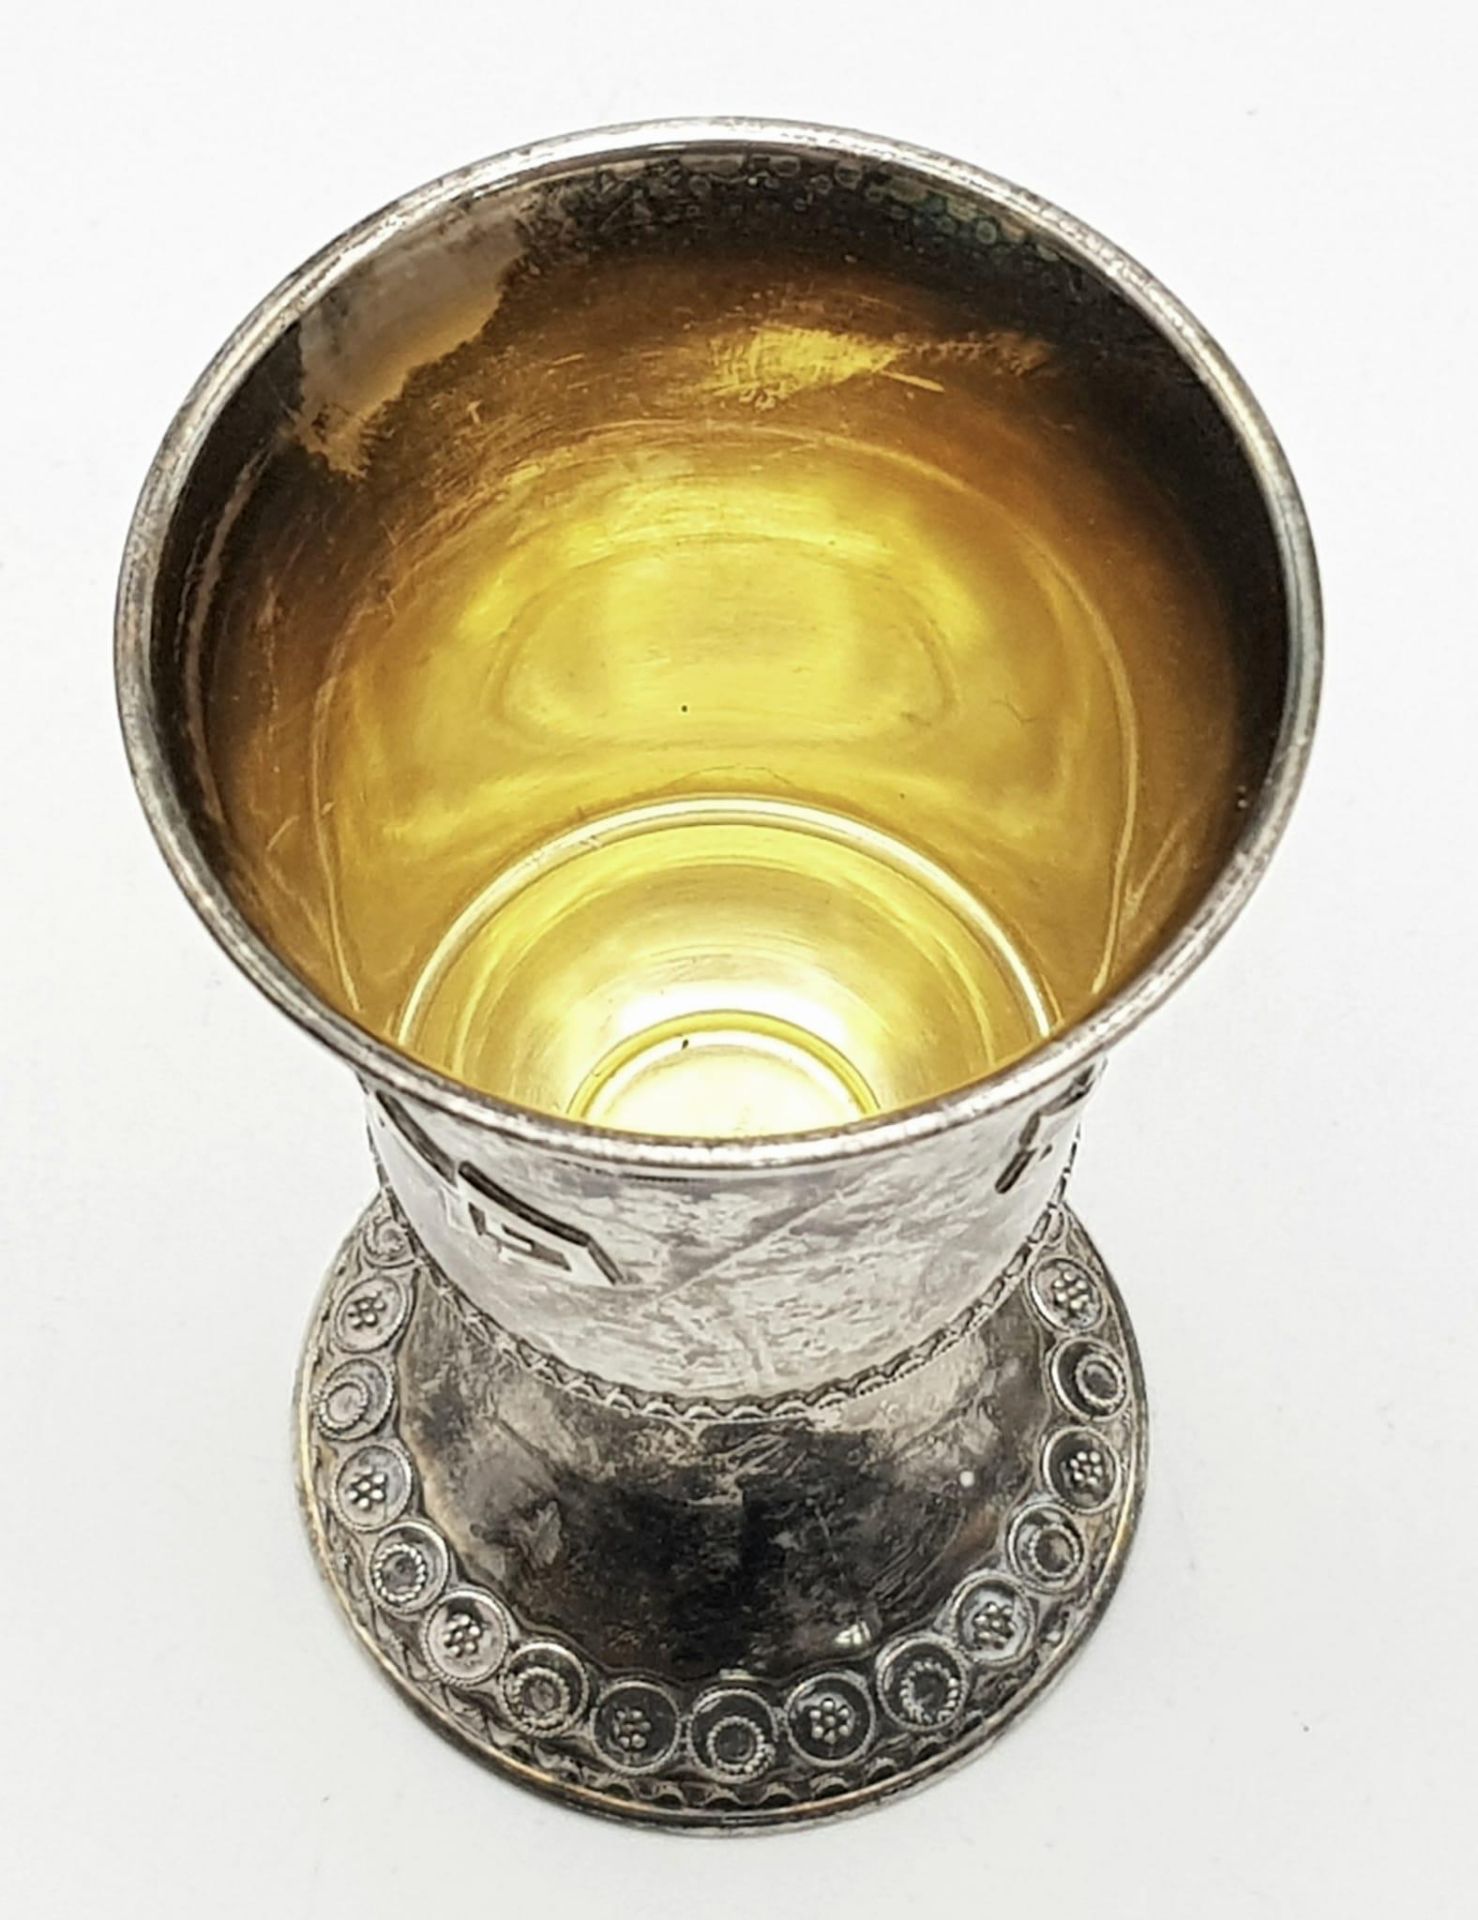 A SOLID SILVER KIDDISH CUP WITH THE BLESSING FOR WINE WRITTEN AROUND IT. 57.8gms 10cms TALL - Image 8 of 13